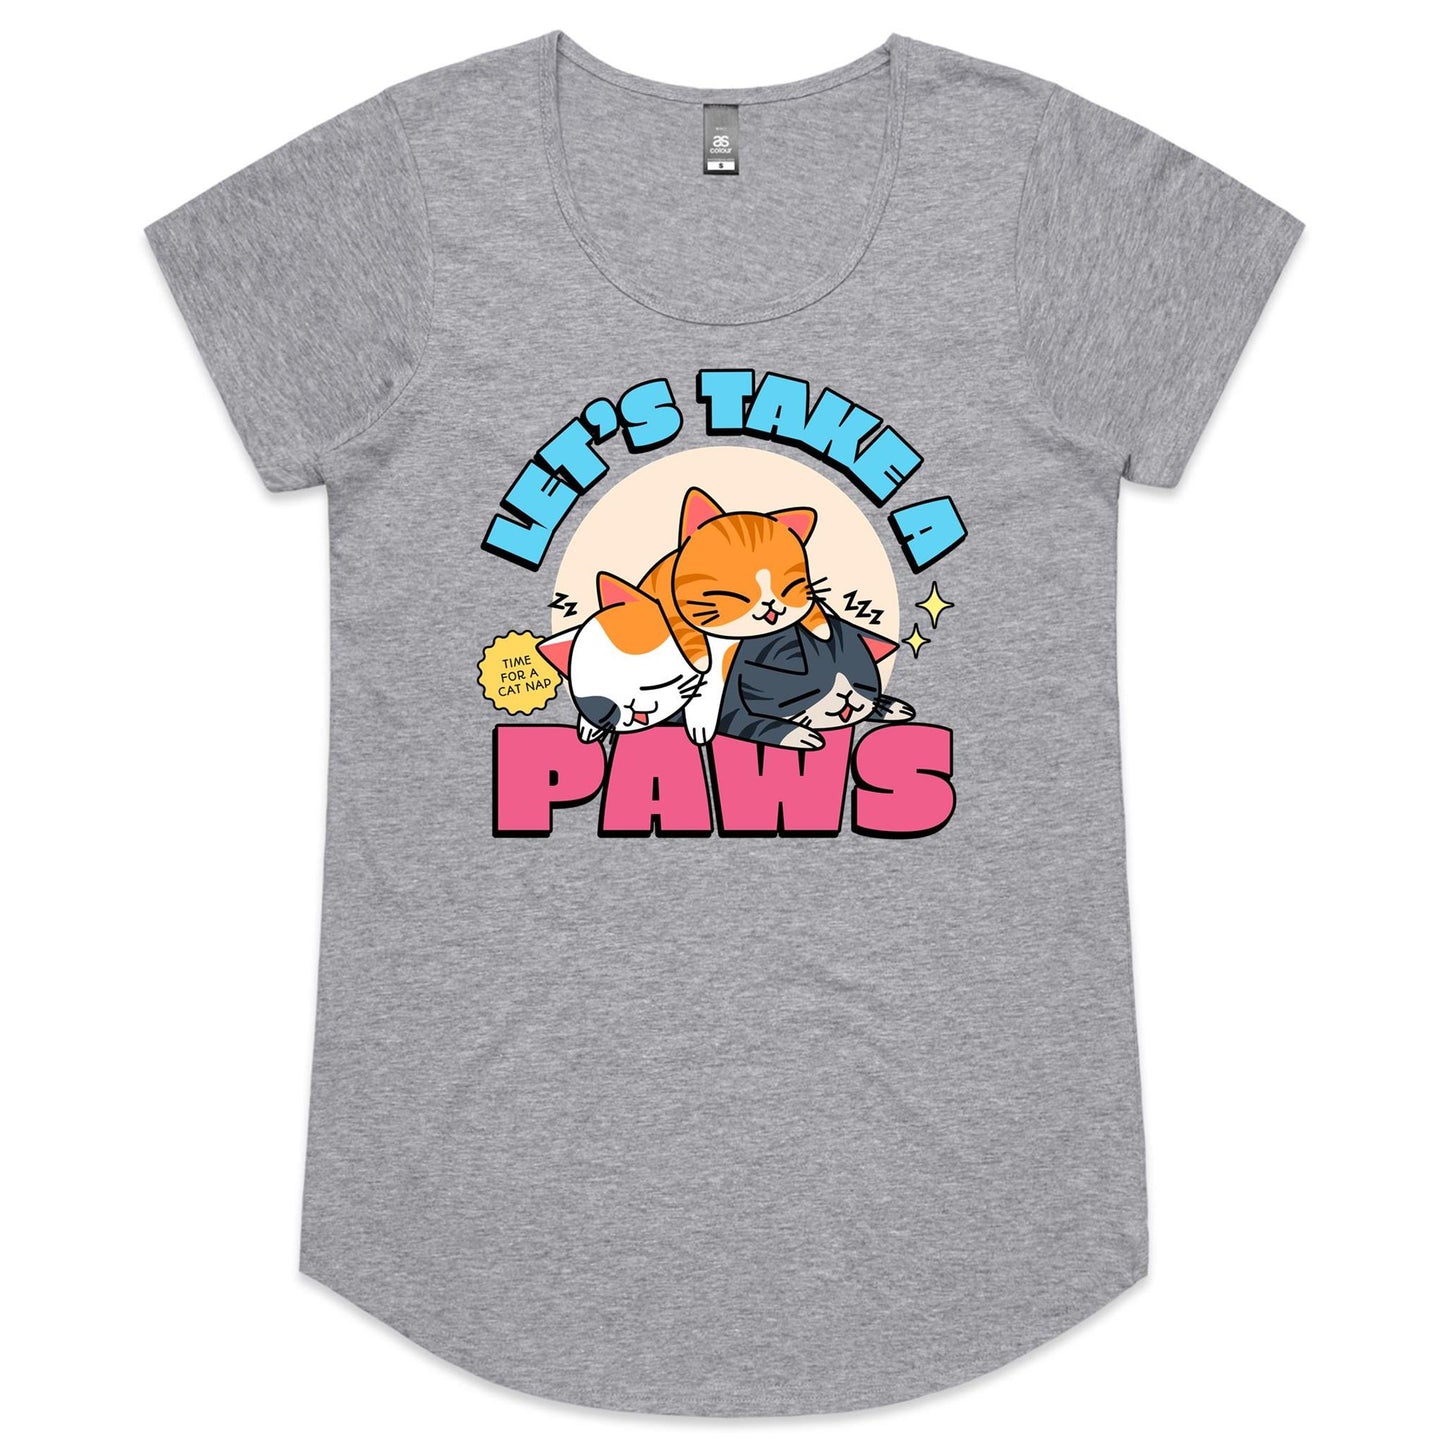 Let's Take A Paws, Time For A Cat Nap - Womens Scoop Neck T-Shirt Grey Marle Womens Scoop Neck T-shirt animal